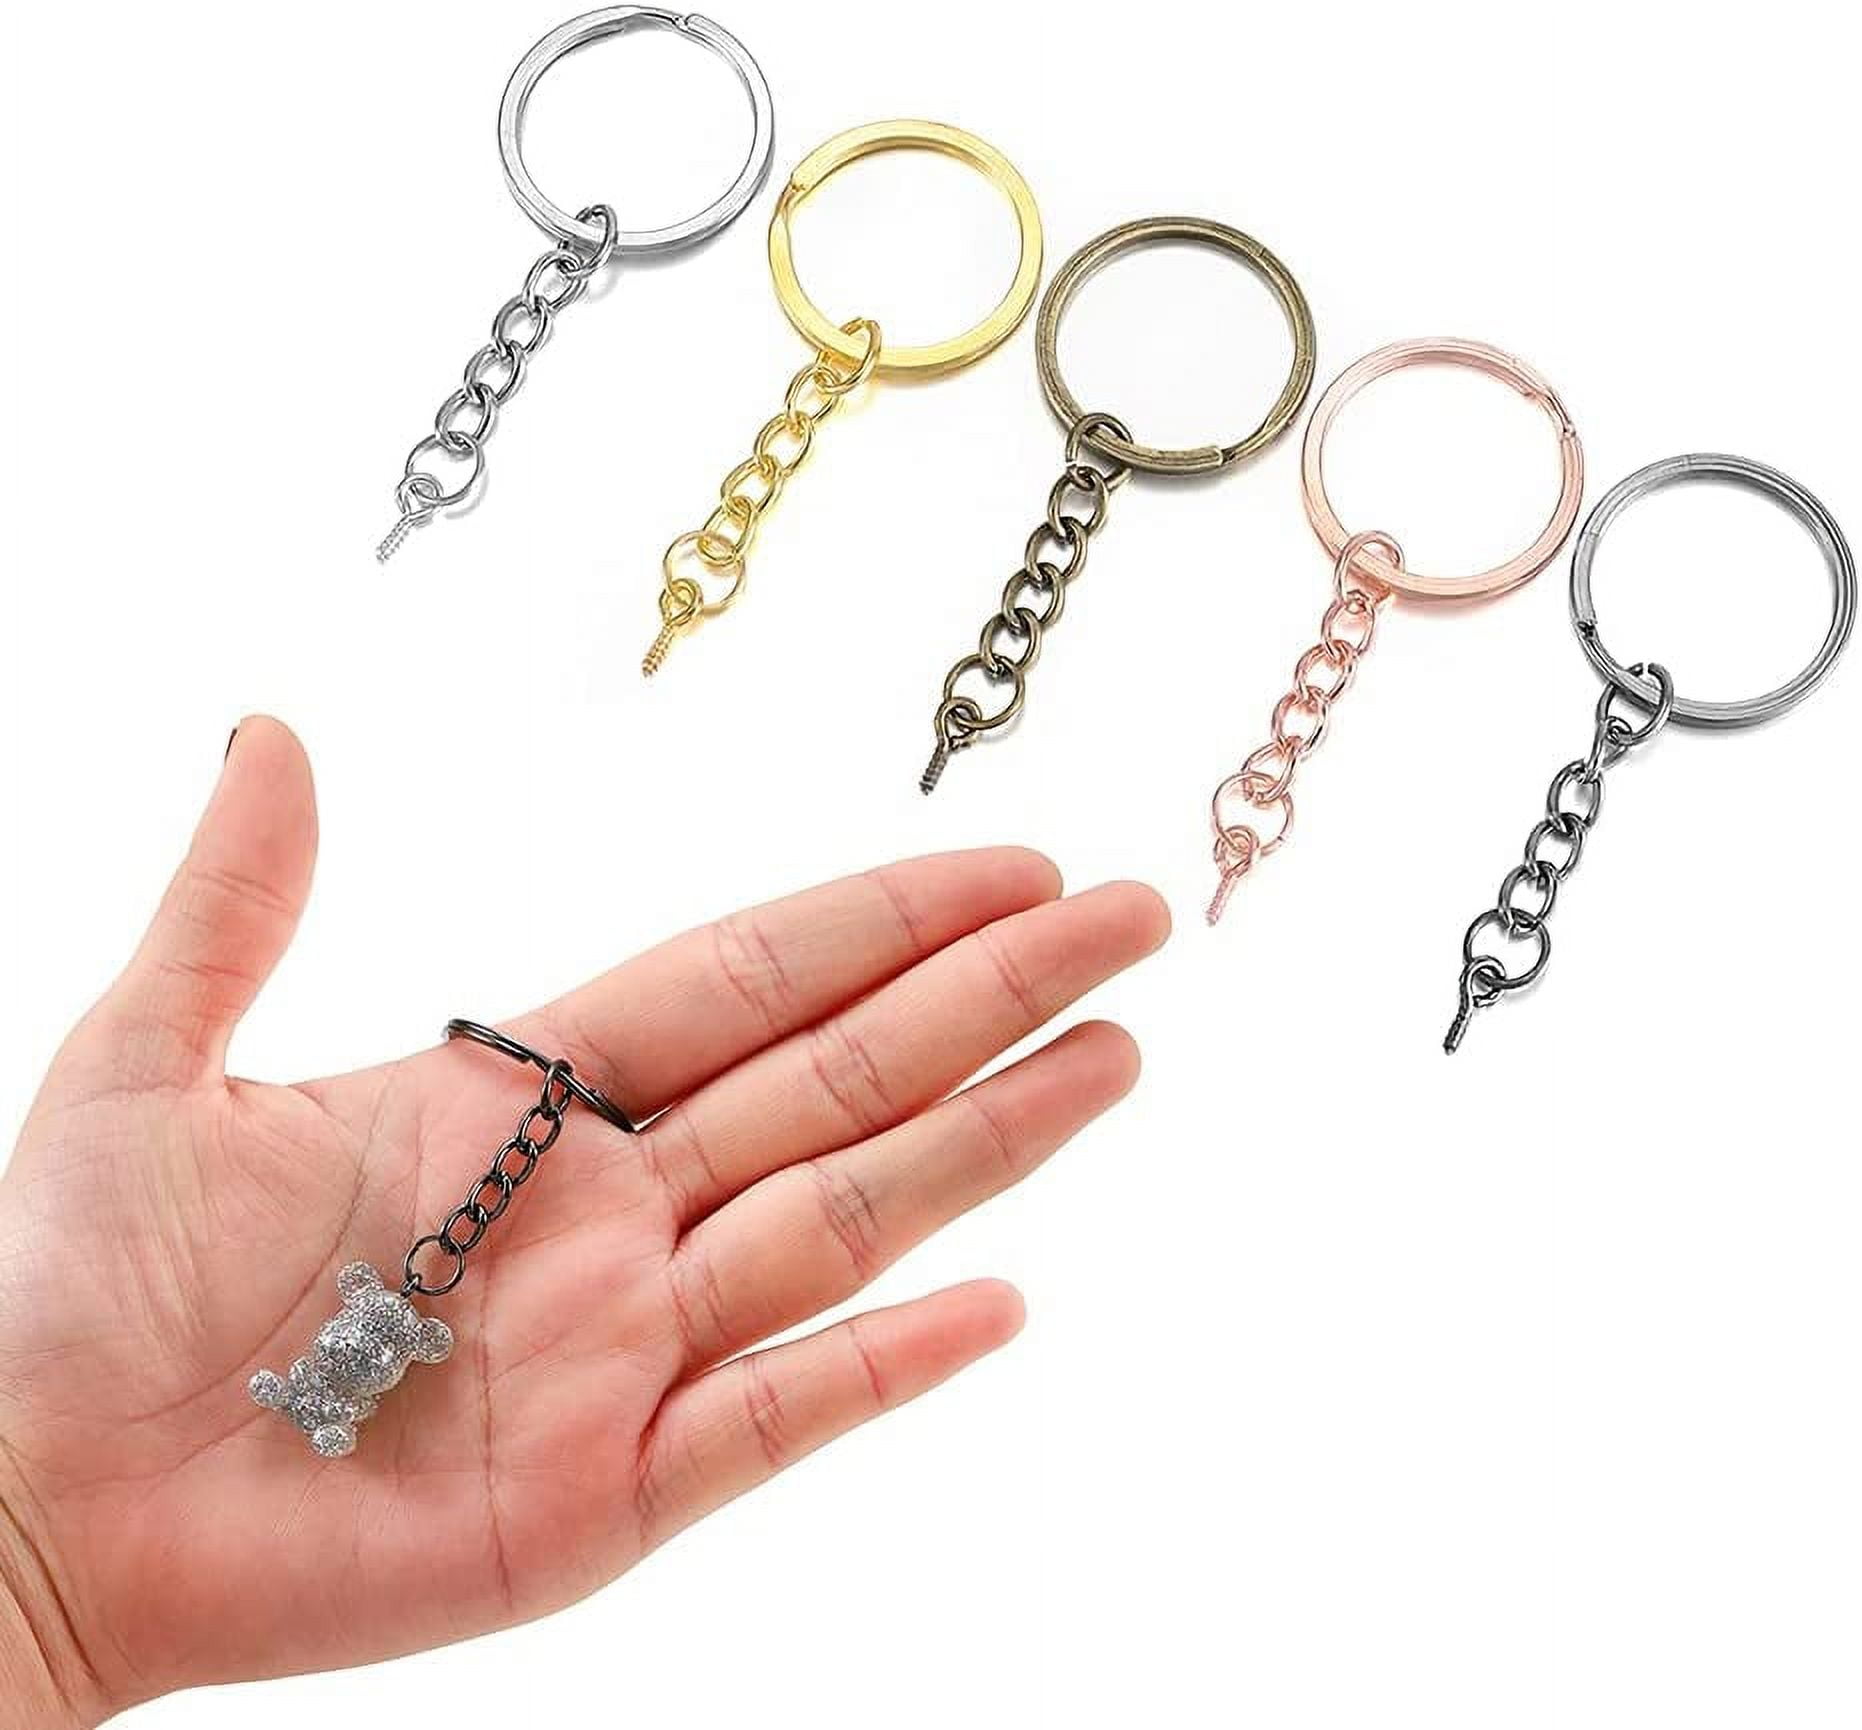 10pcs/lot Polished Silver Color 30mm Keyring Keychain Split Ring With Short  Chain Key Rings Women